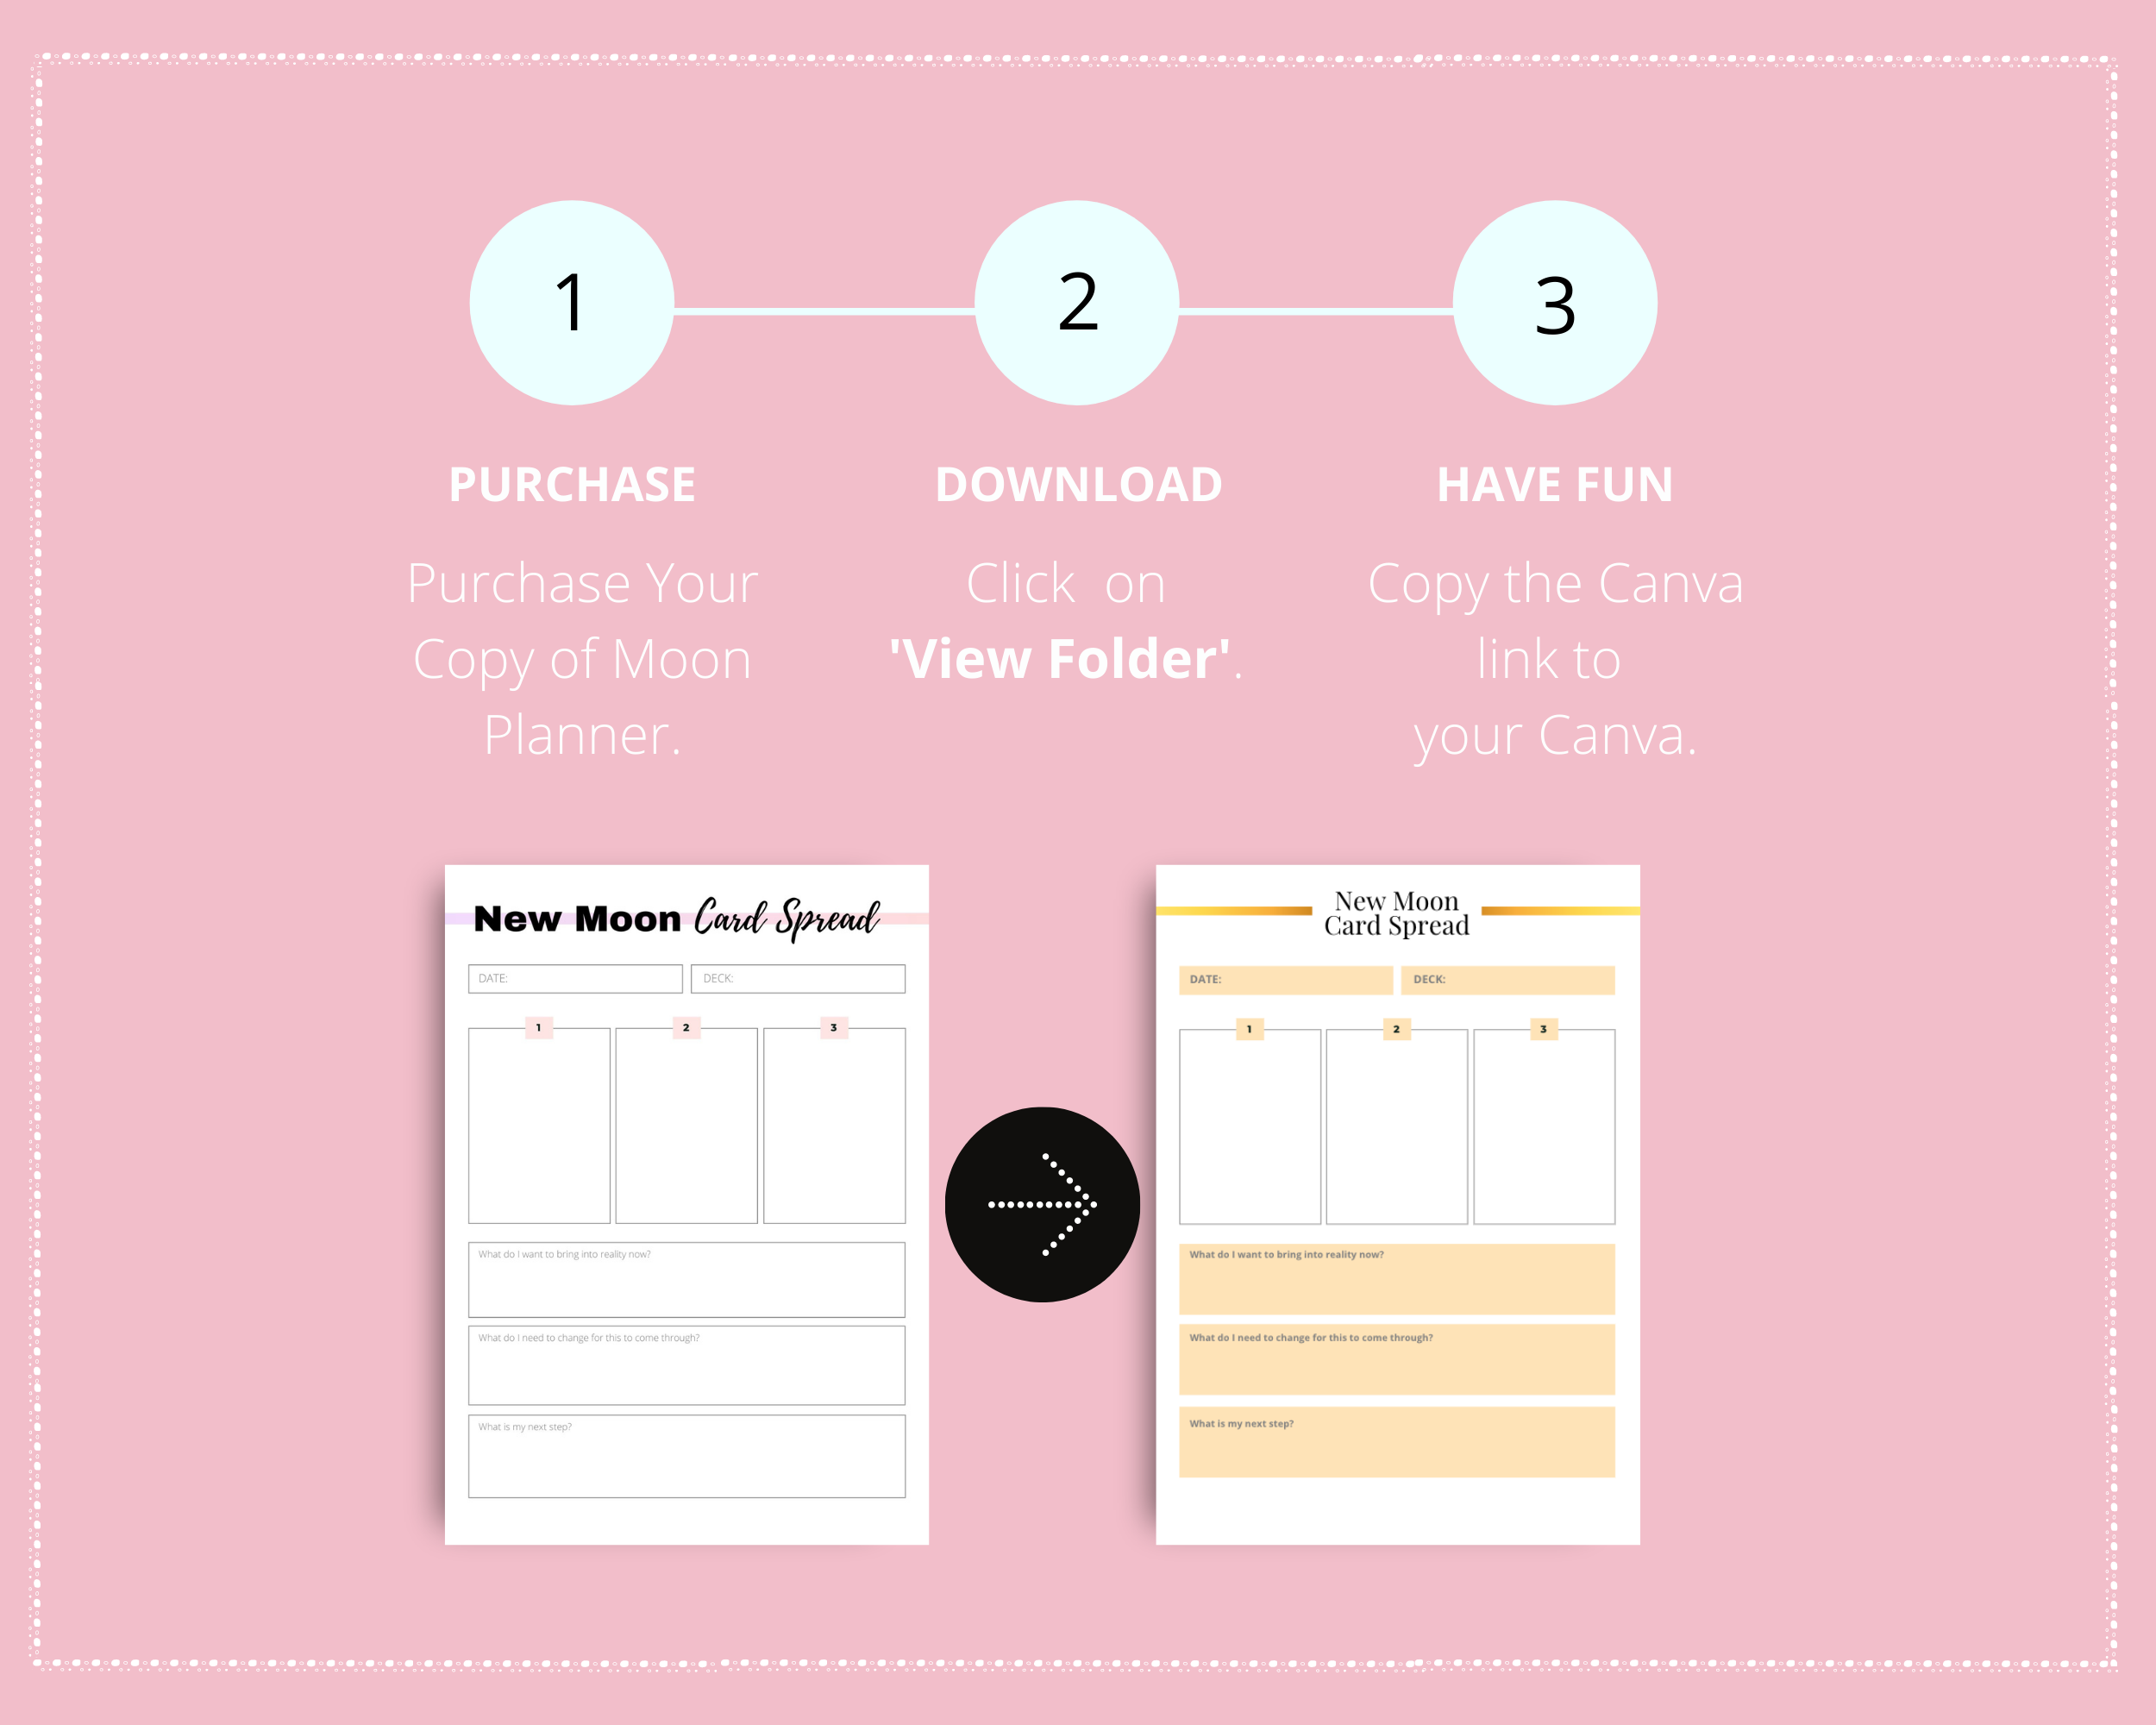 Editable Moon Journal Planner Templates in Canva | Commercial Use